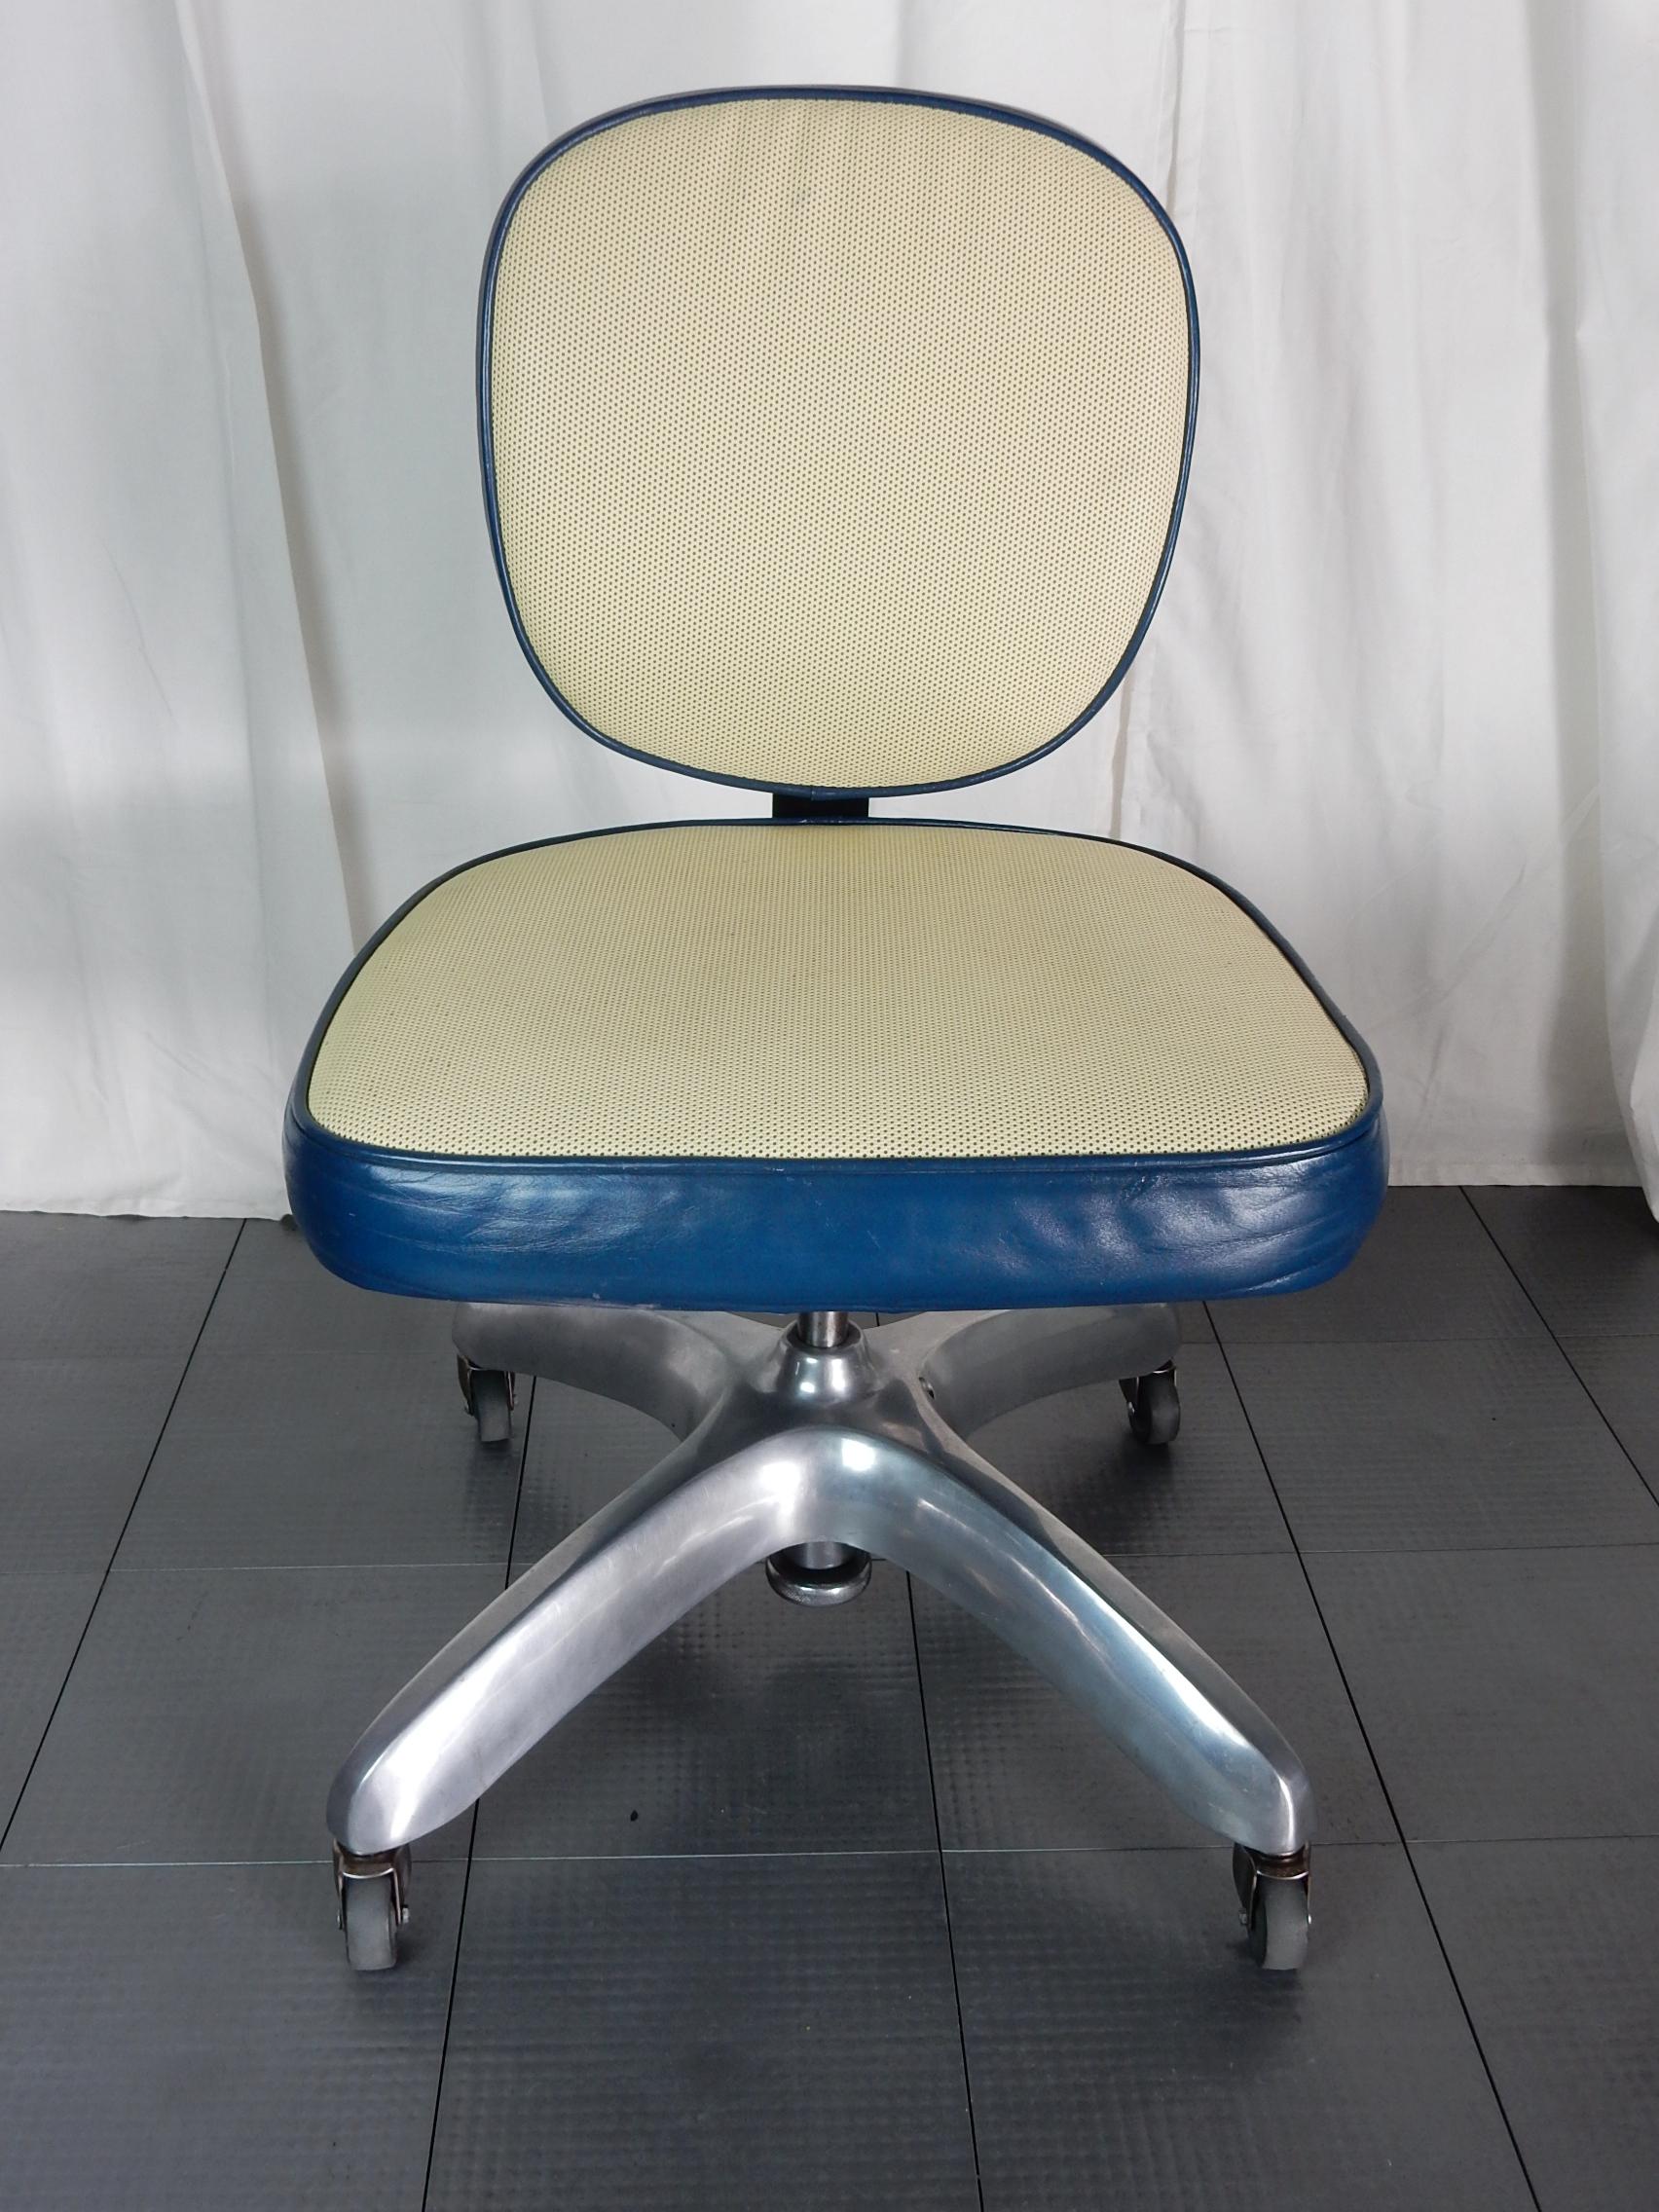 A rare model of executive office chair by Cramer, circa 1930s.
Swivels on a streamline rolling propeller base of polished aluminum.
Polished aluminum seat back.
Seat adjusts up, down (raises to 22 inch and lowers to 17 inch) forward and backward